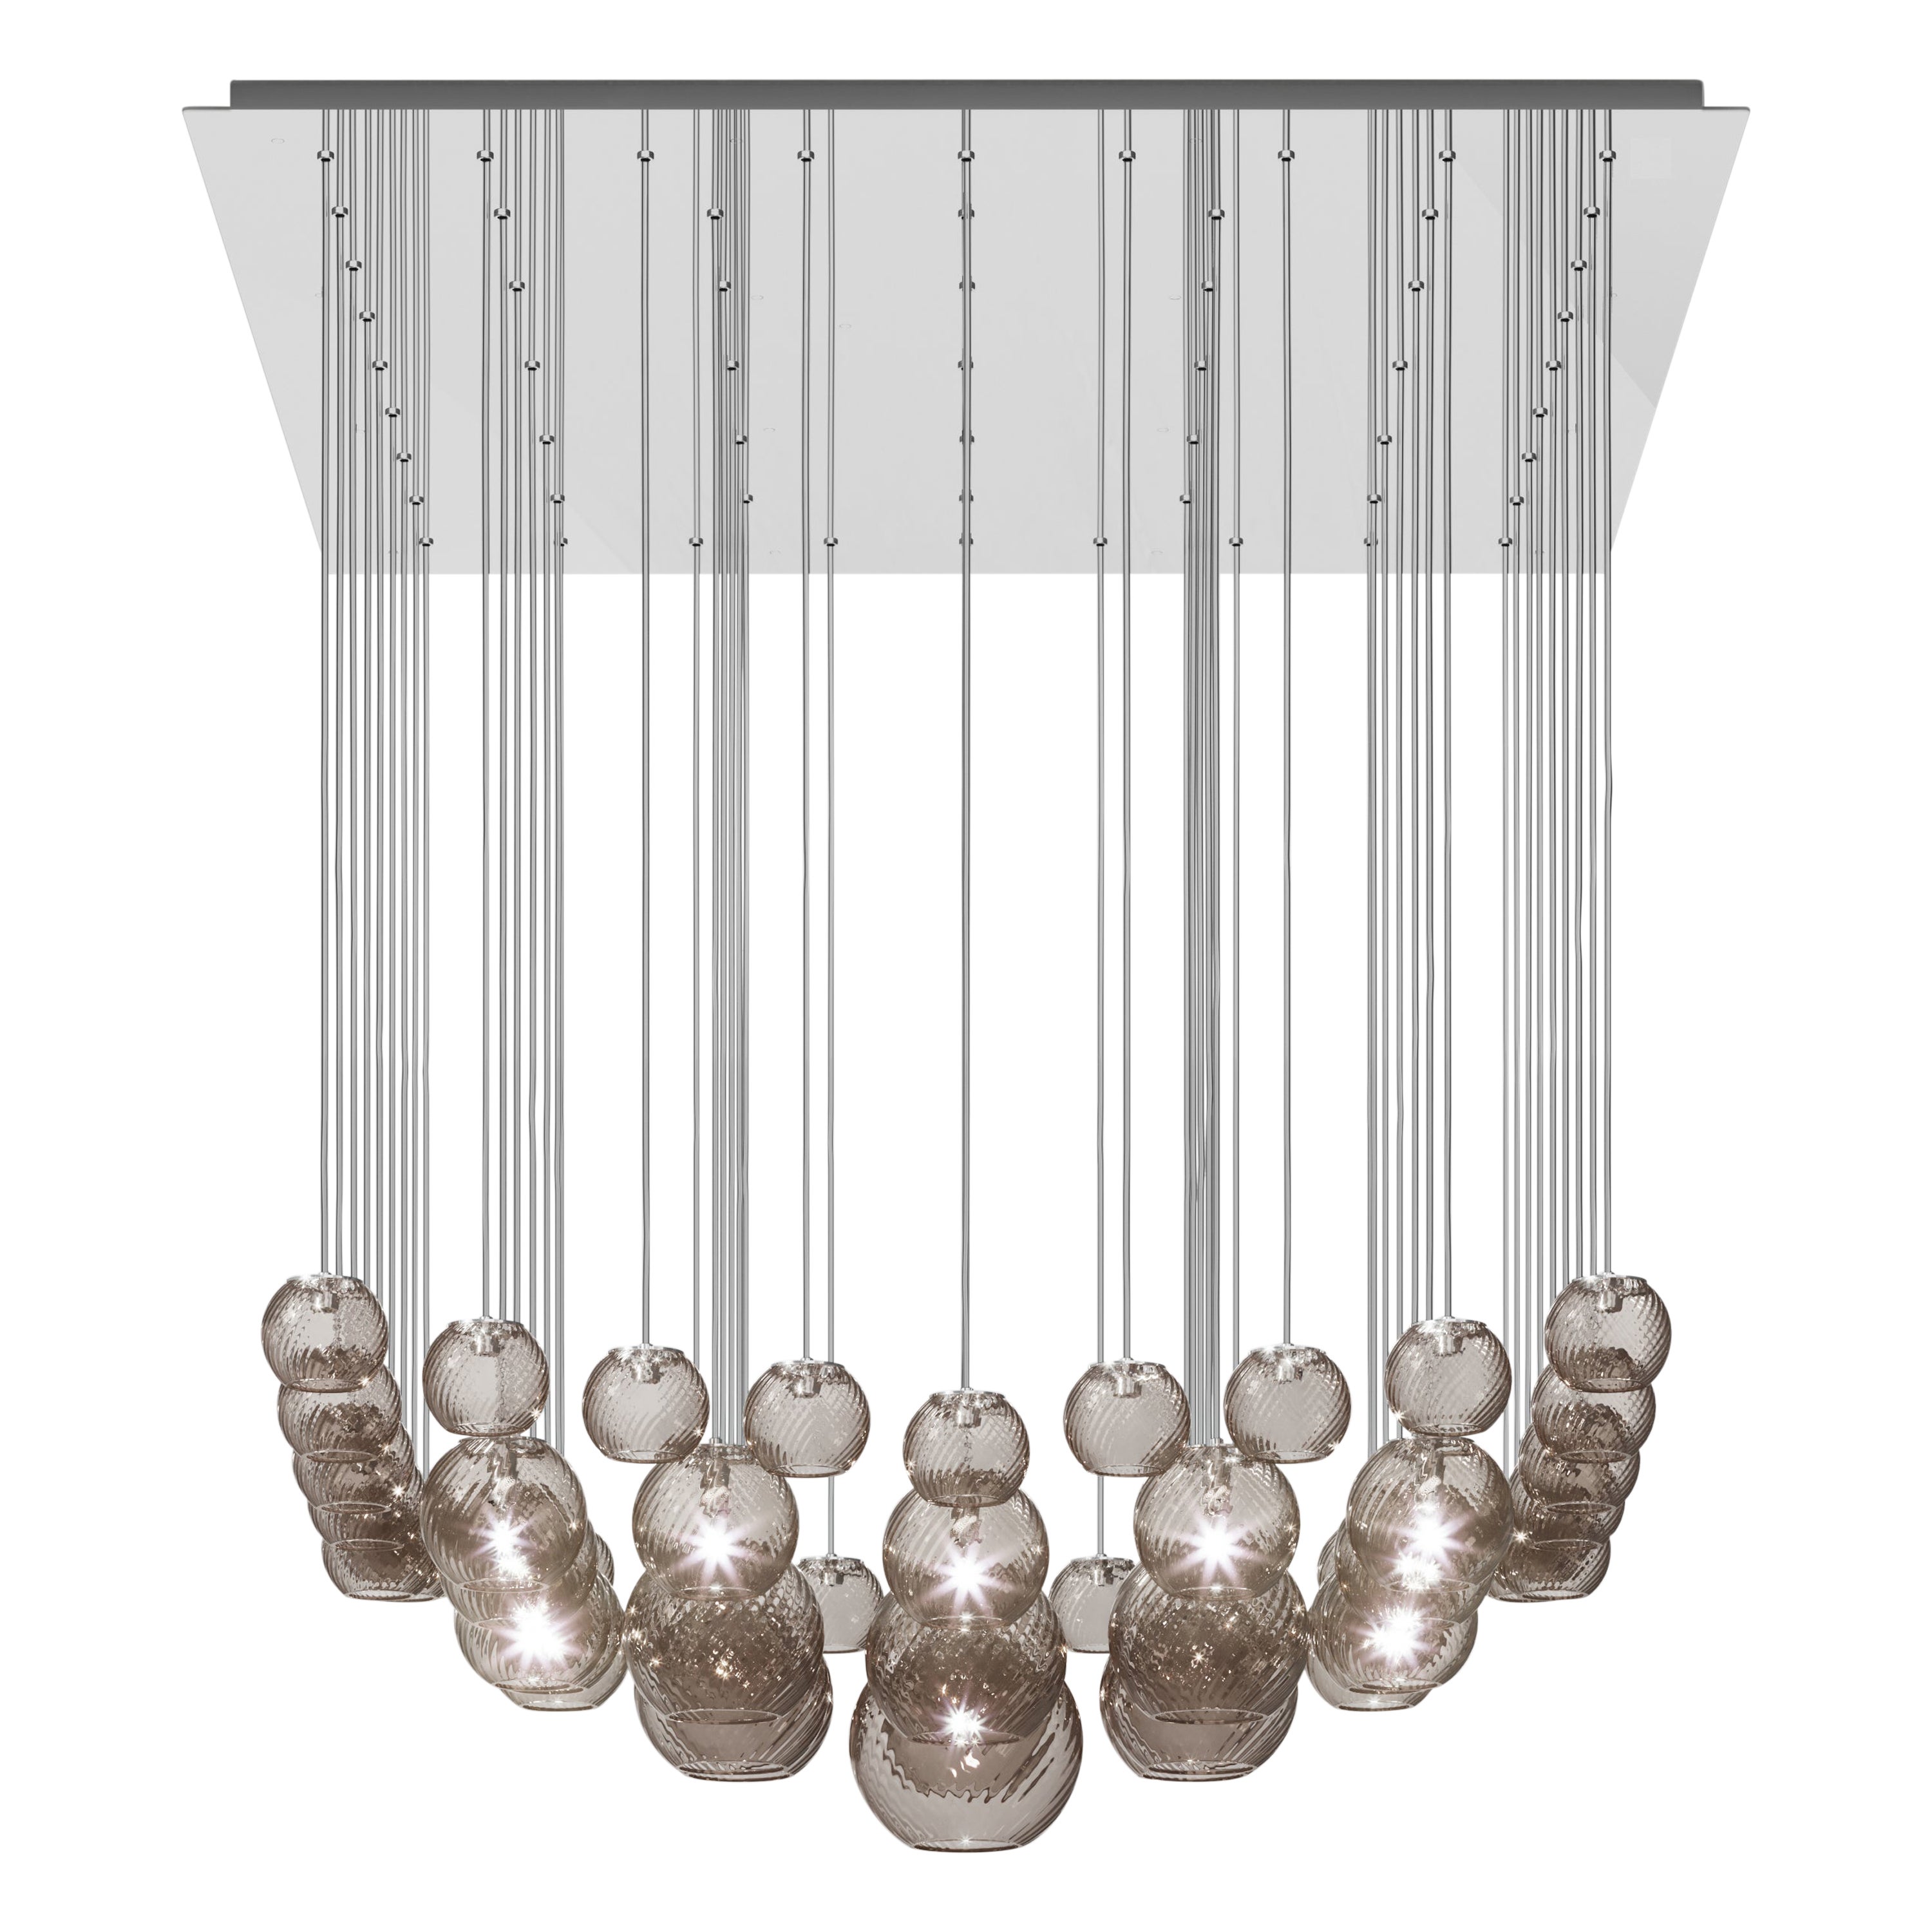 Vistosi Pendant Light in Smoky Striped Glass And Mirrored Steel Frame For Sale